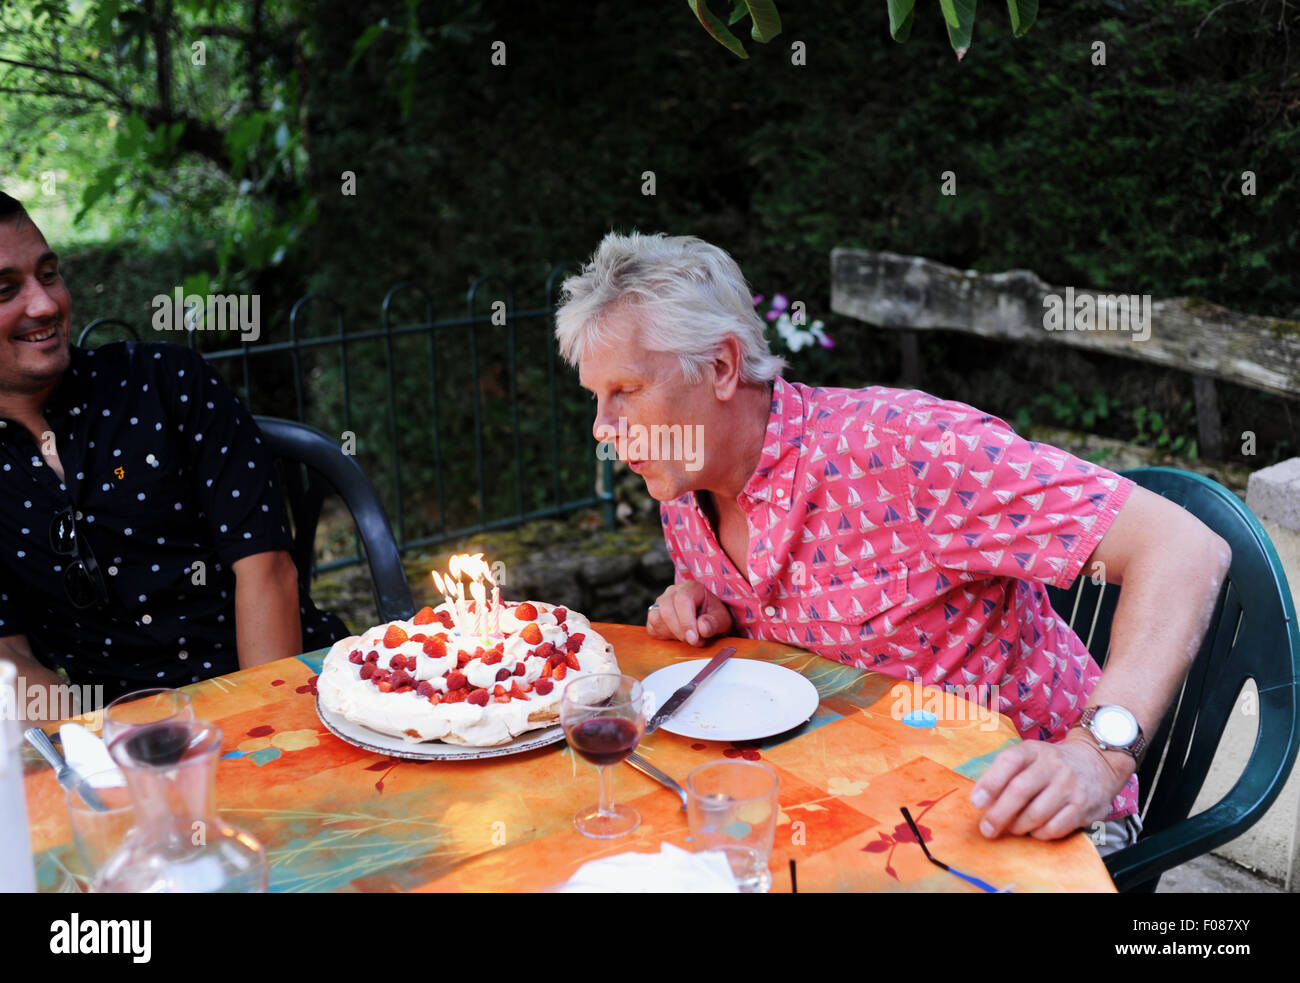 Man in his 50s celebrating his birthday blowing out candles on a cake Stock Photo